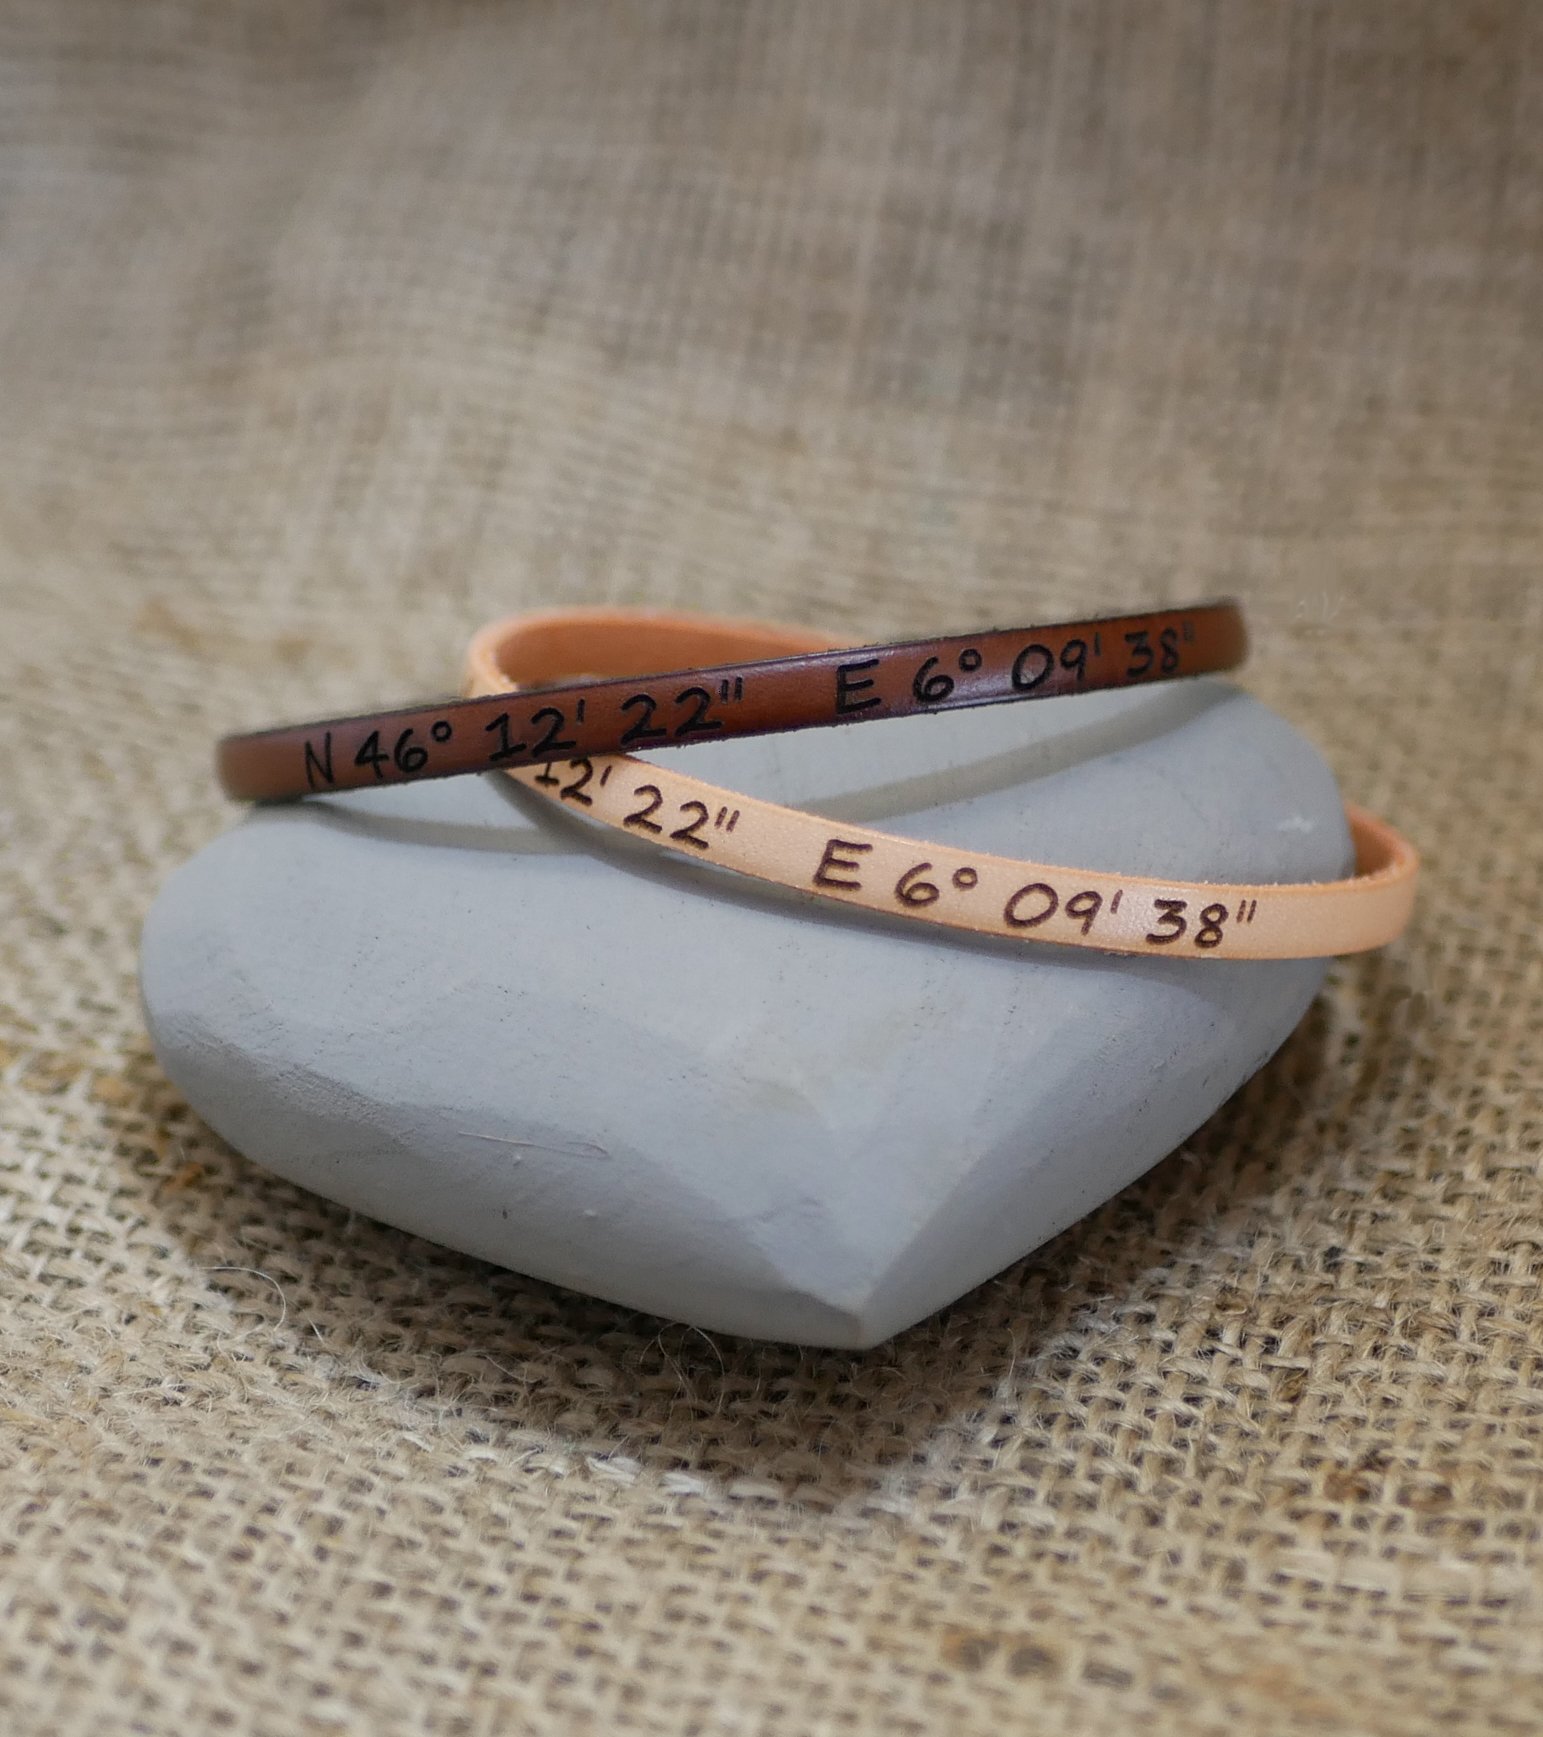 Gift for a couple 2 personalized leather bracelets with the same engraving 